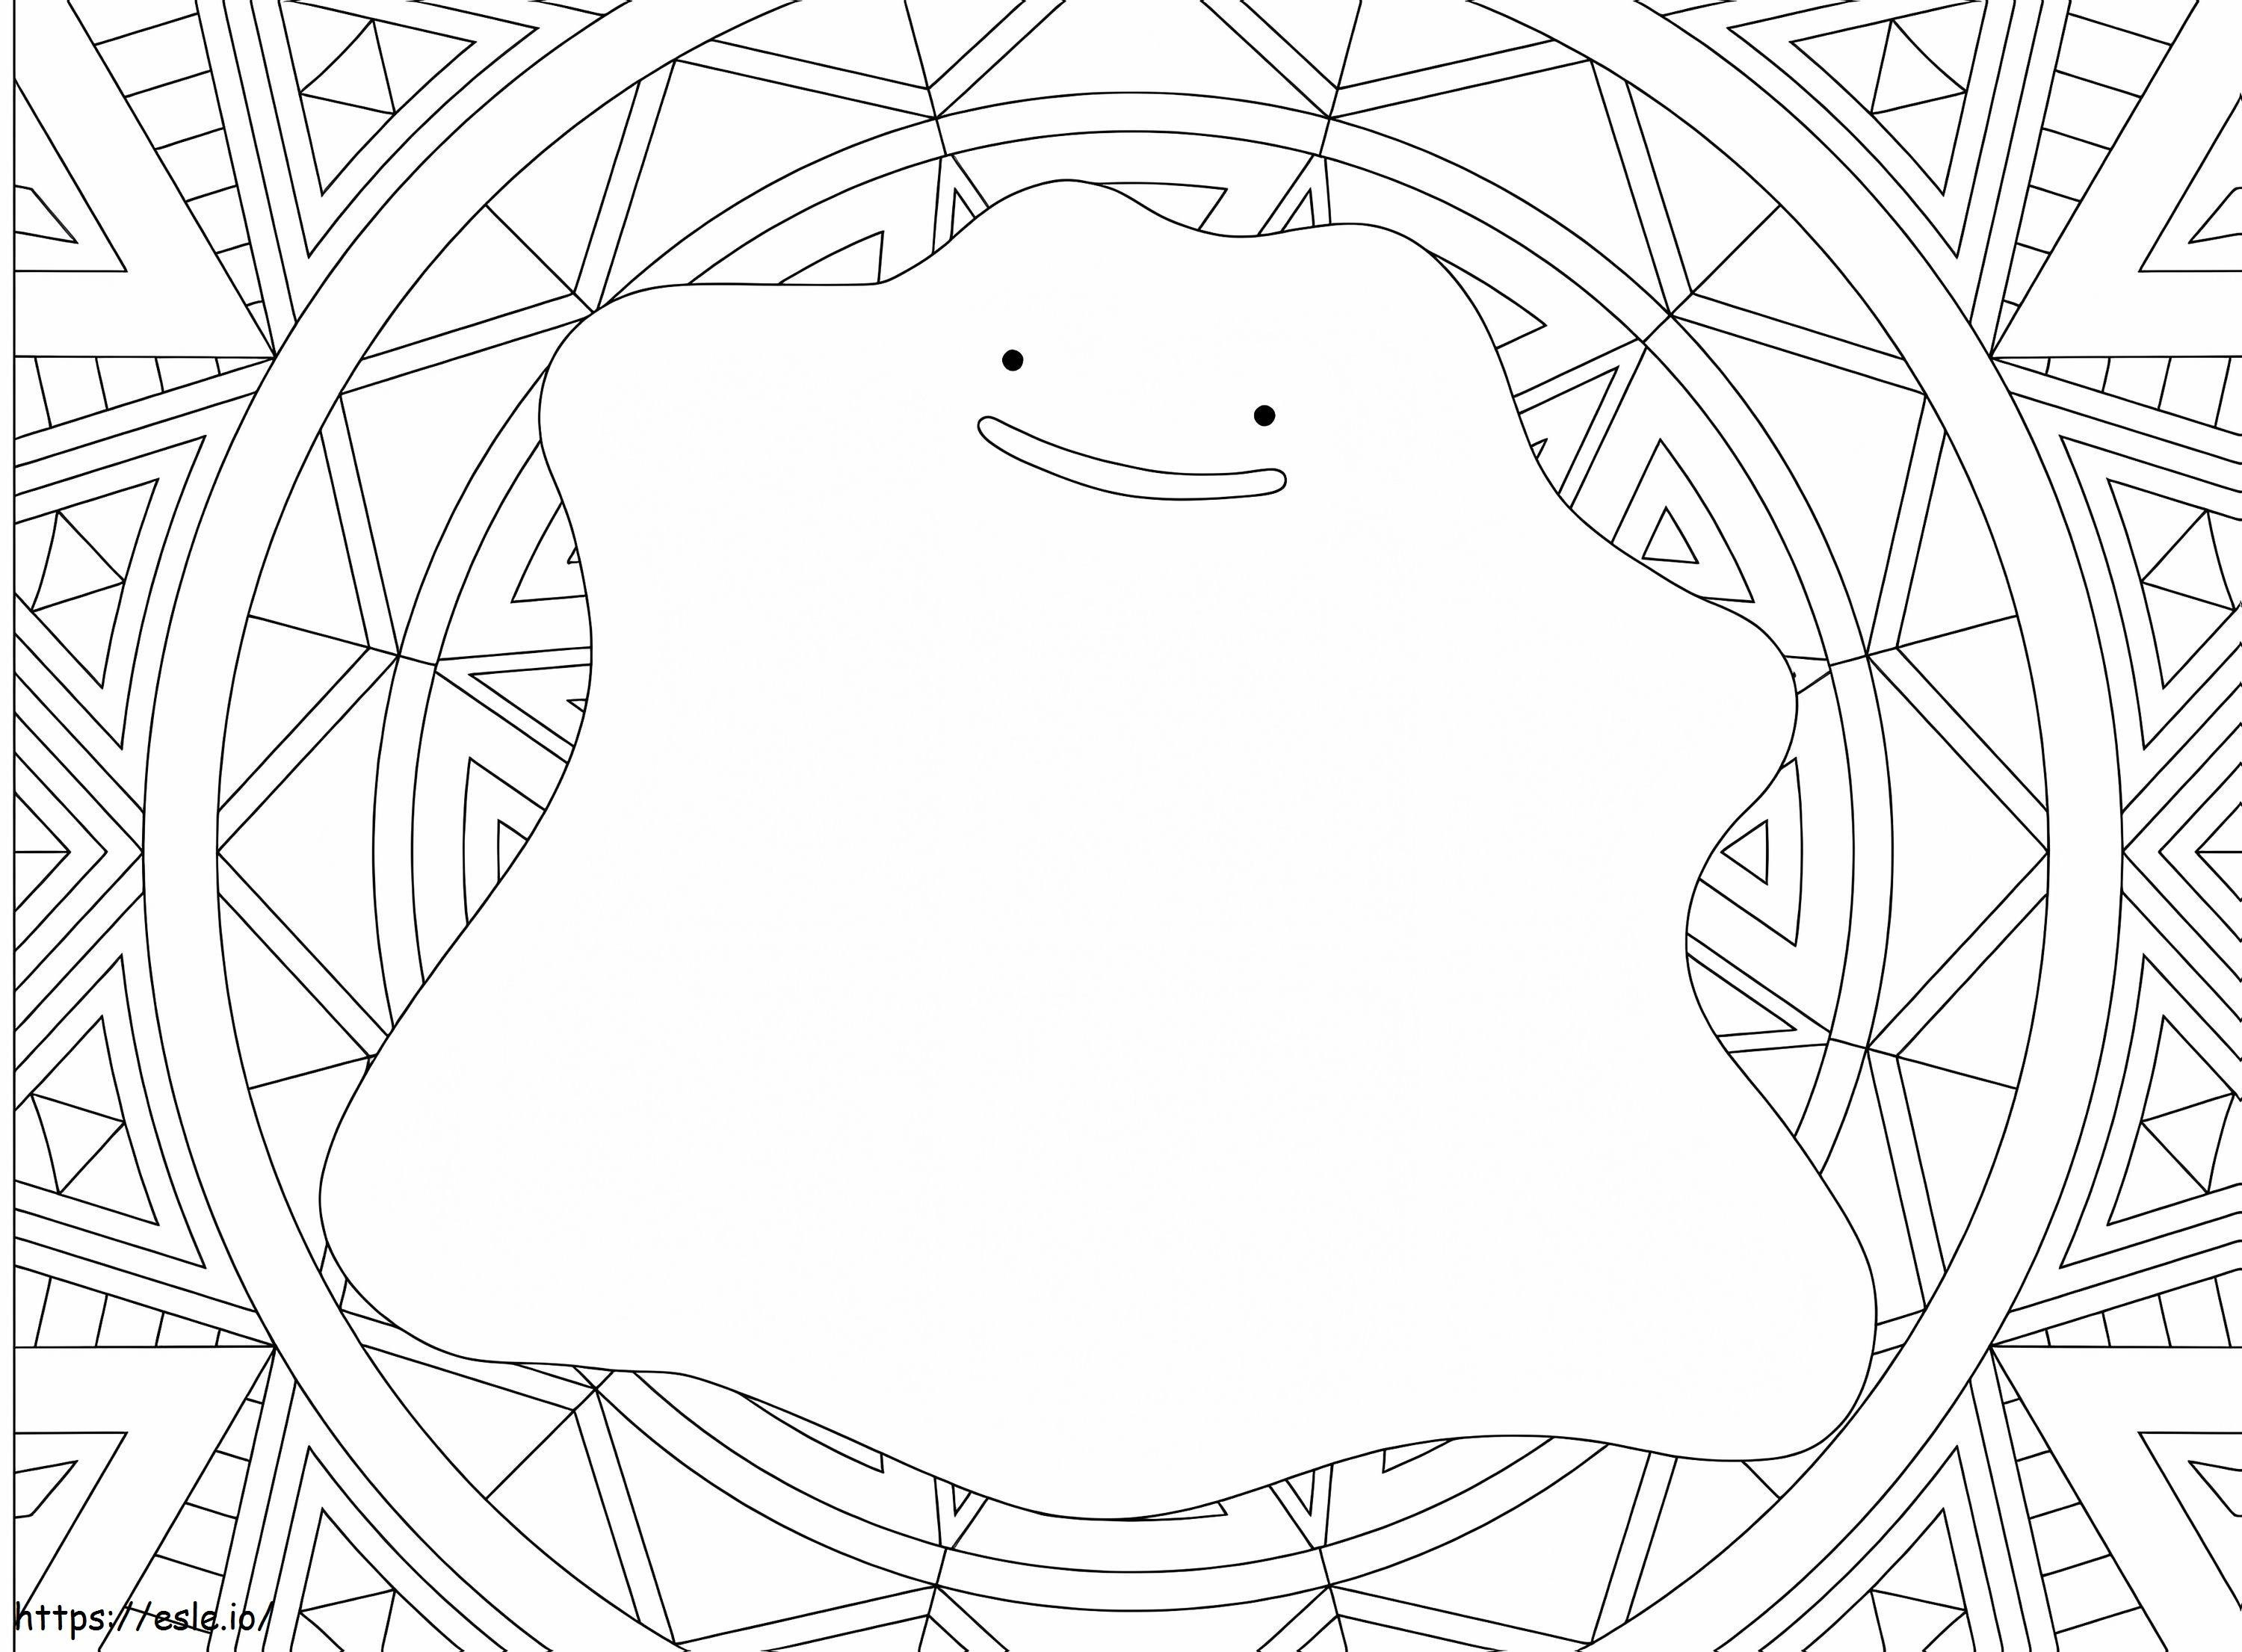 Ditto 3 coloring page